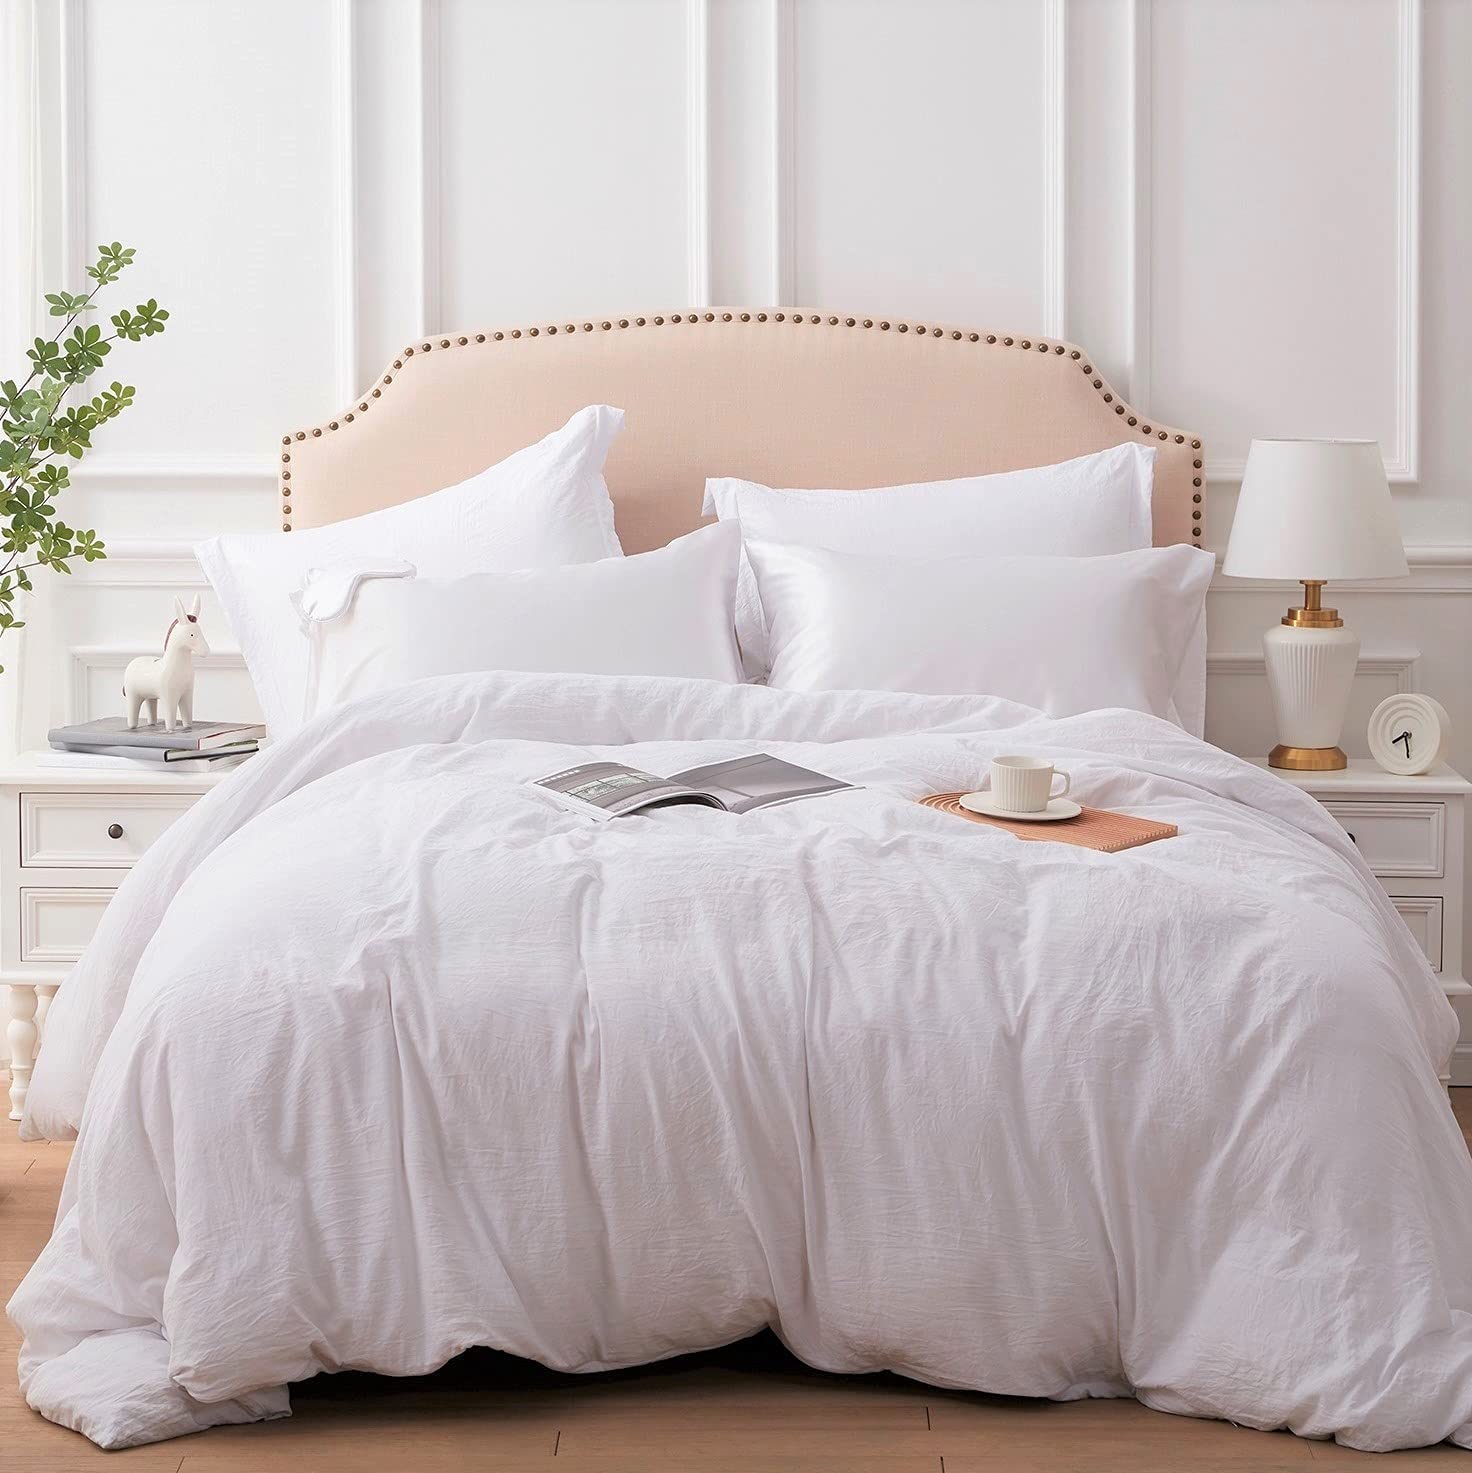 Price:$29.99  Duvet Cover Full Size White Microfiber Comforter Cover Set 5 Piece with Eye Mask and Zipper, 2 Brushed Pillow Shams and 2 Satin Pillowcases - 80x90 inches : Home & Kitchen